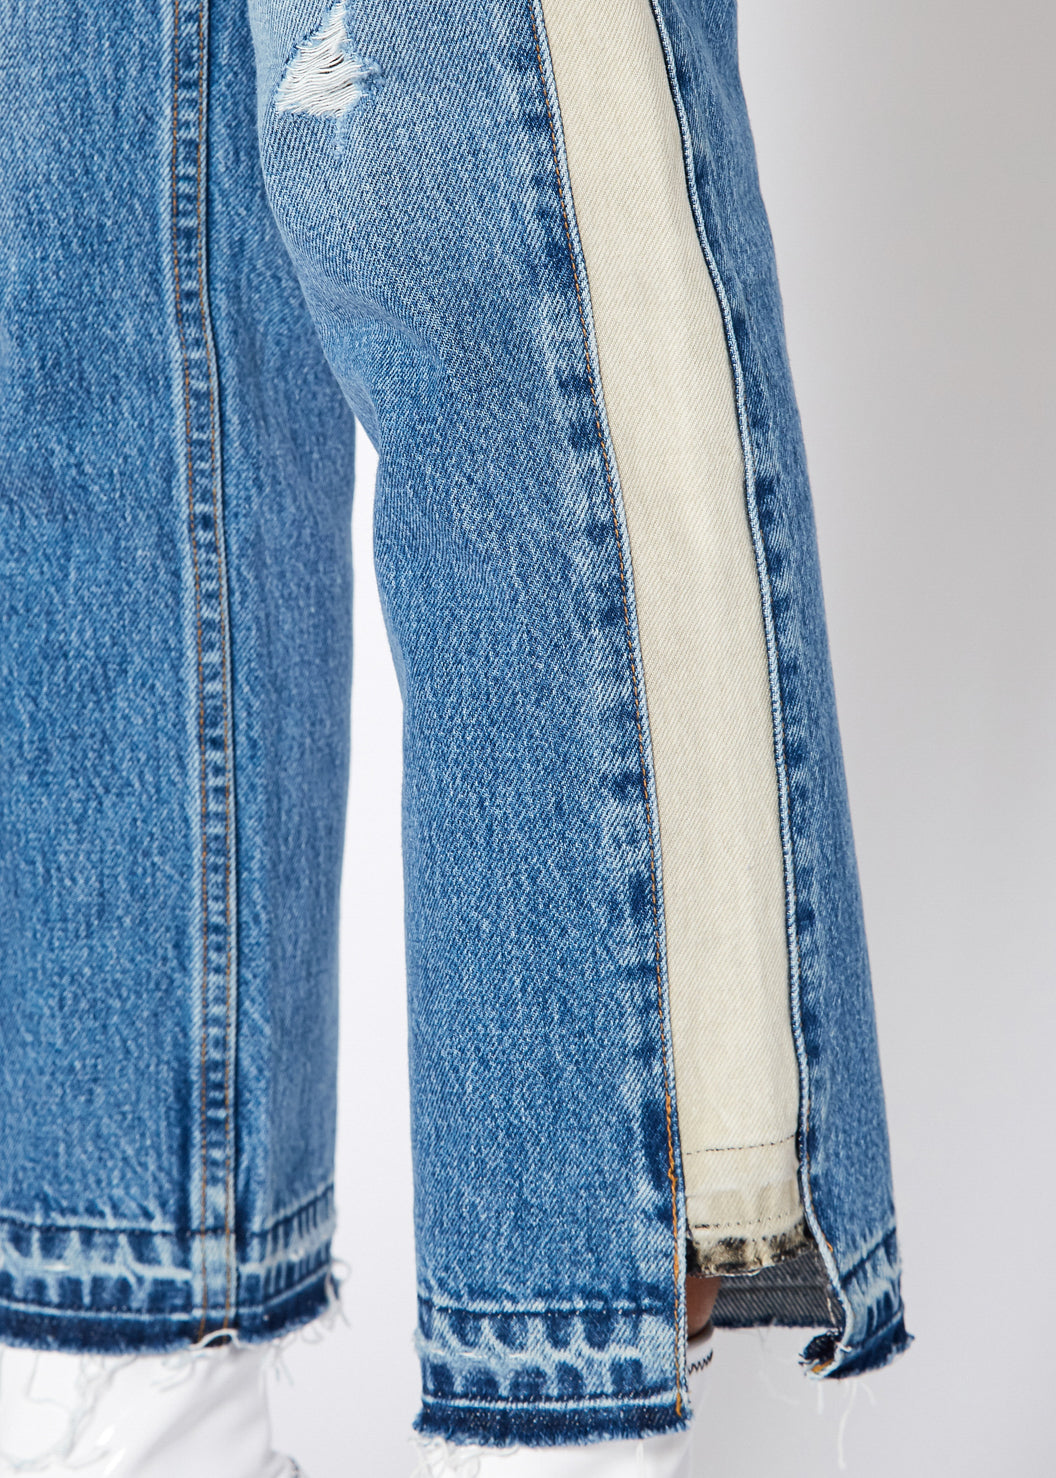 CLAUDE HIGH RISE STRAIGHT CROP IN ROUTE - Noend Denim